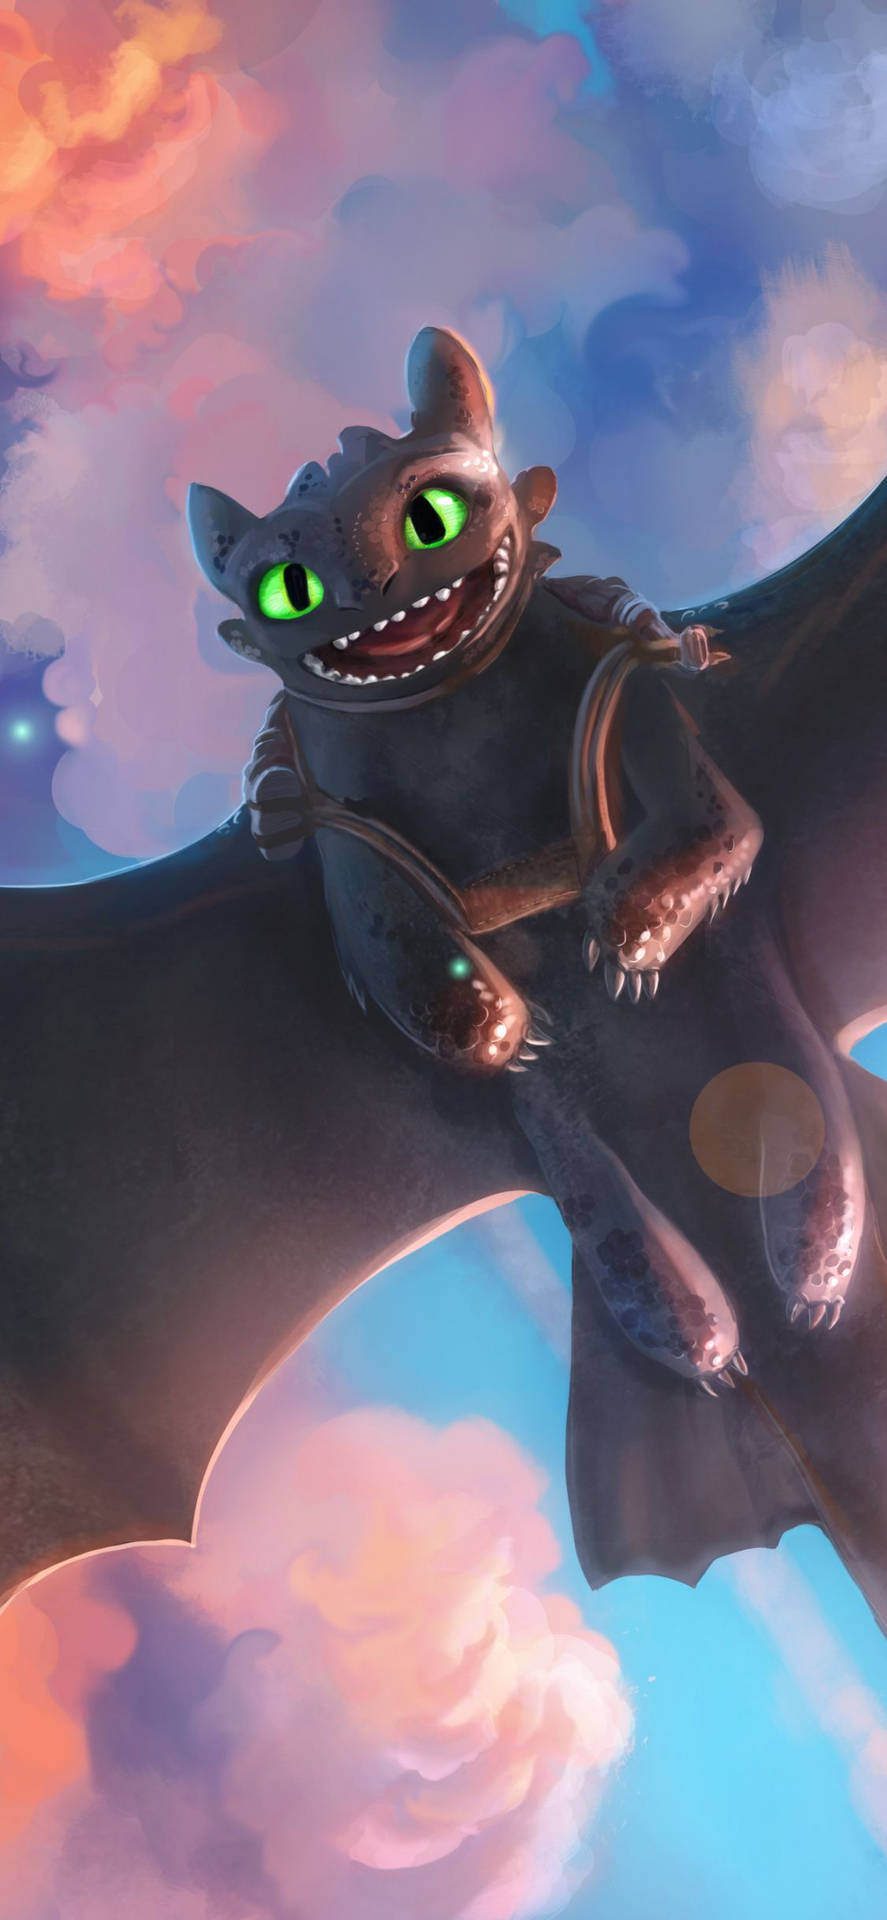 How To Train Your Dragon Smiling Toothless Background